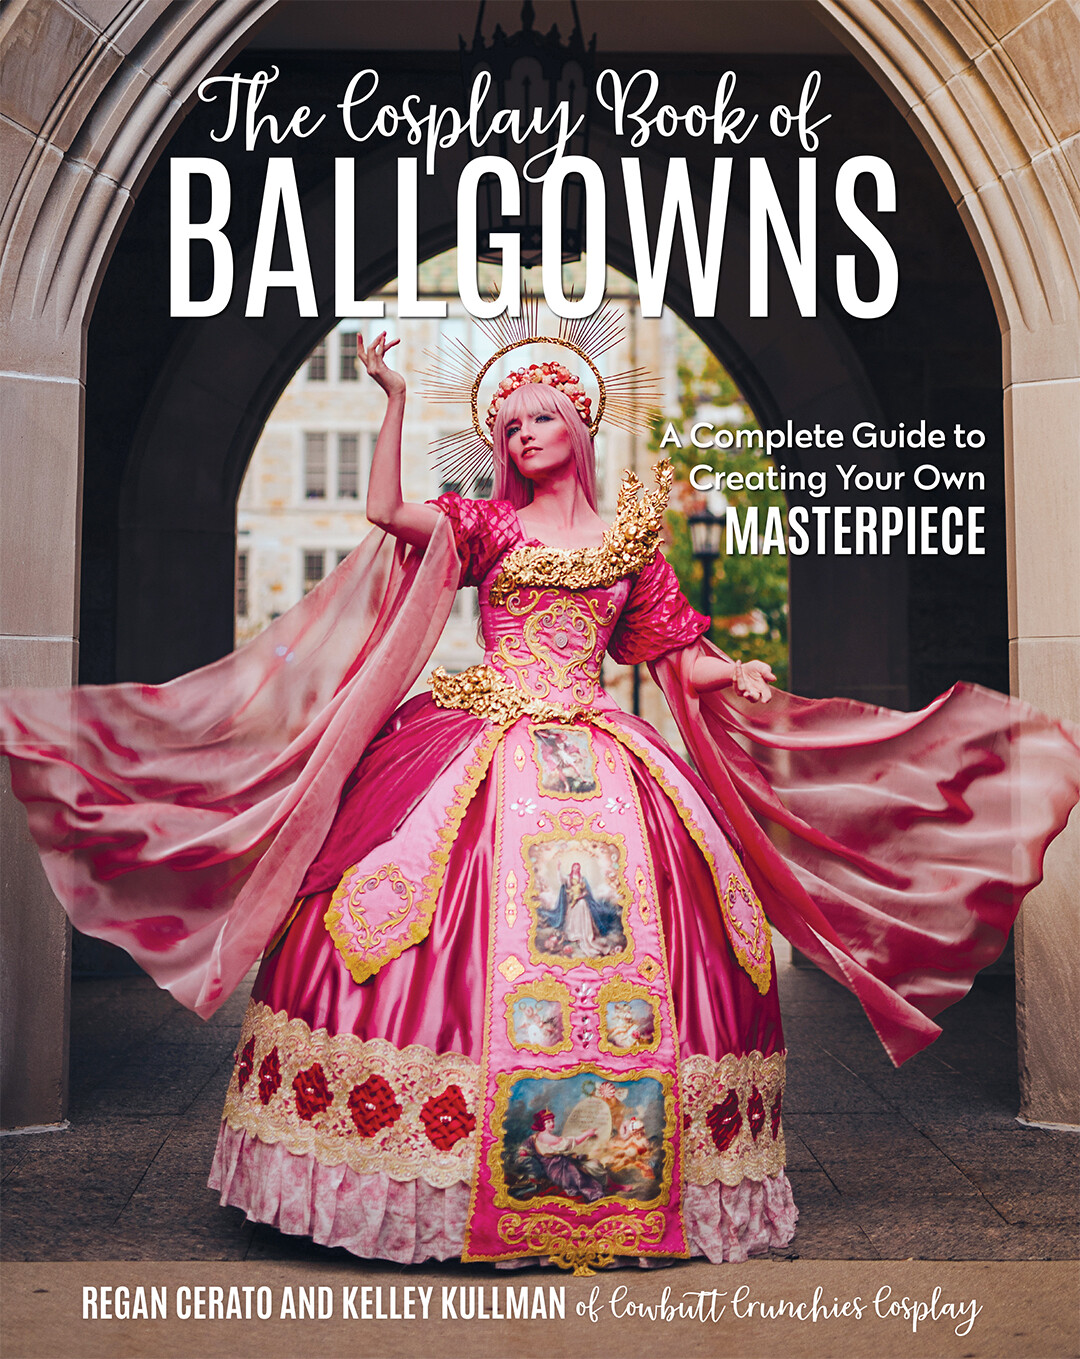 The Cosplay Book of Ballgowns - Digital/Ebook